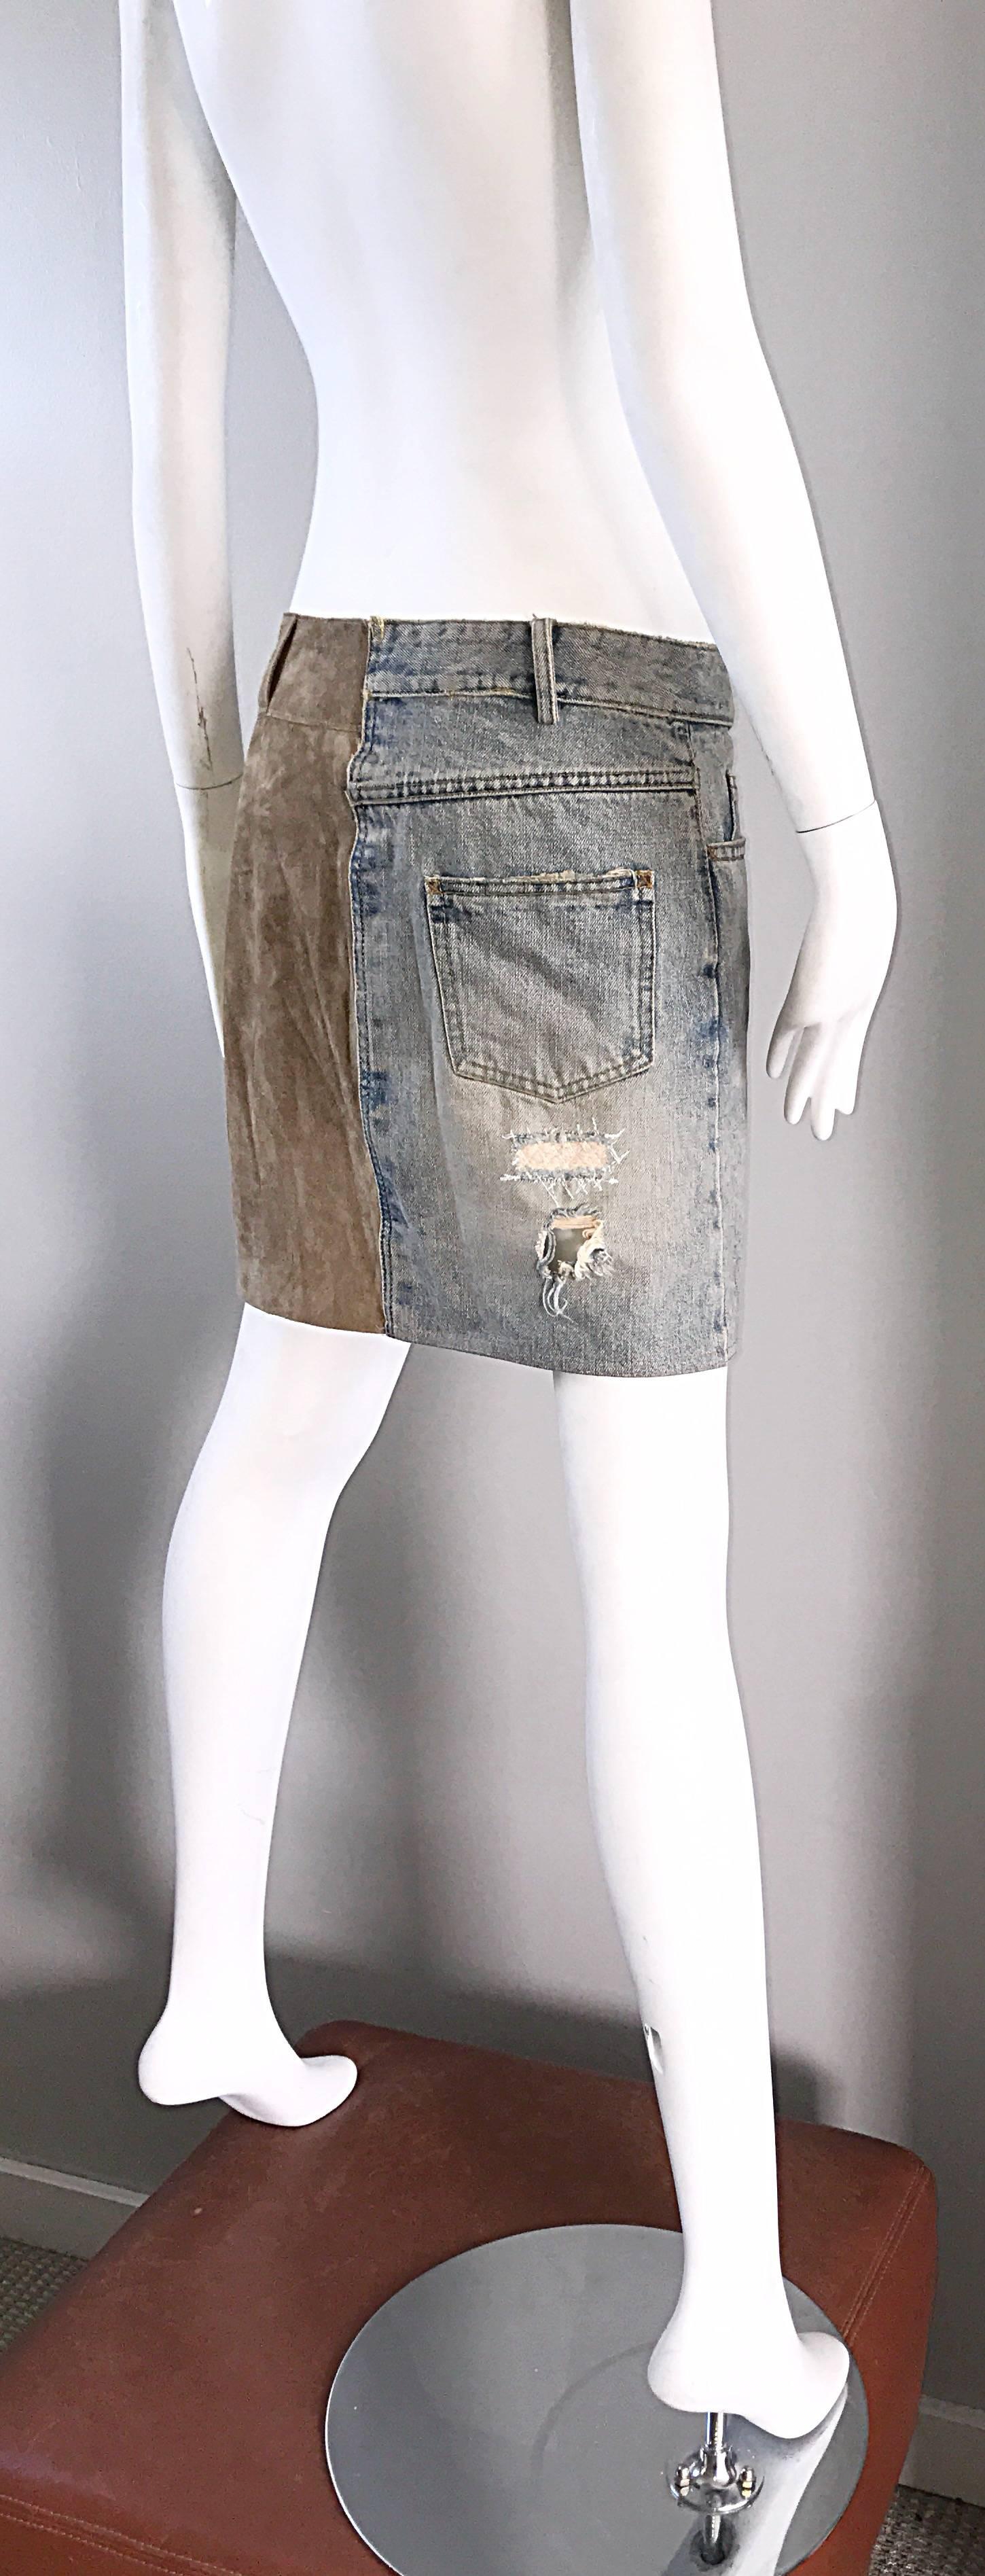 Women's 1990s Dolce and Gabbana Denim + Suede Leather 90s Vintage Distressed Mini Skirt